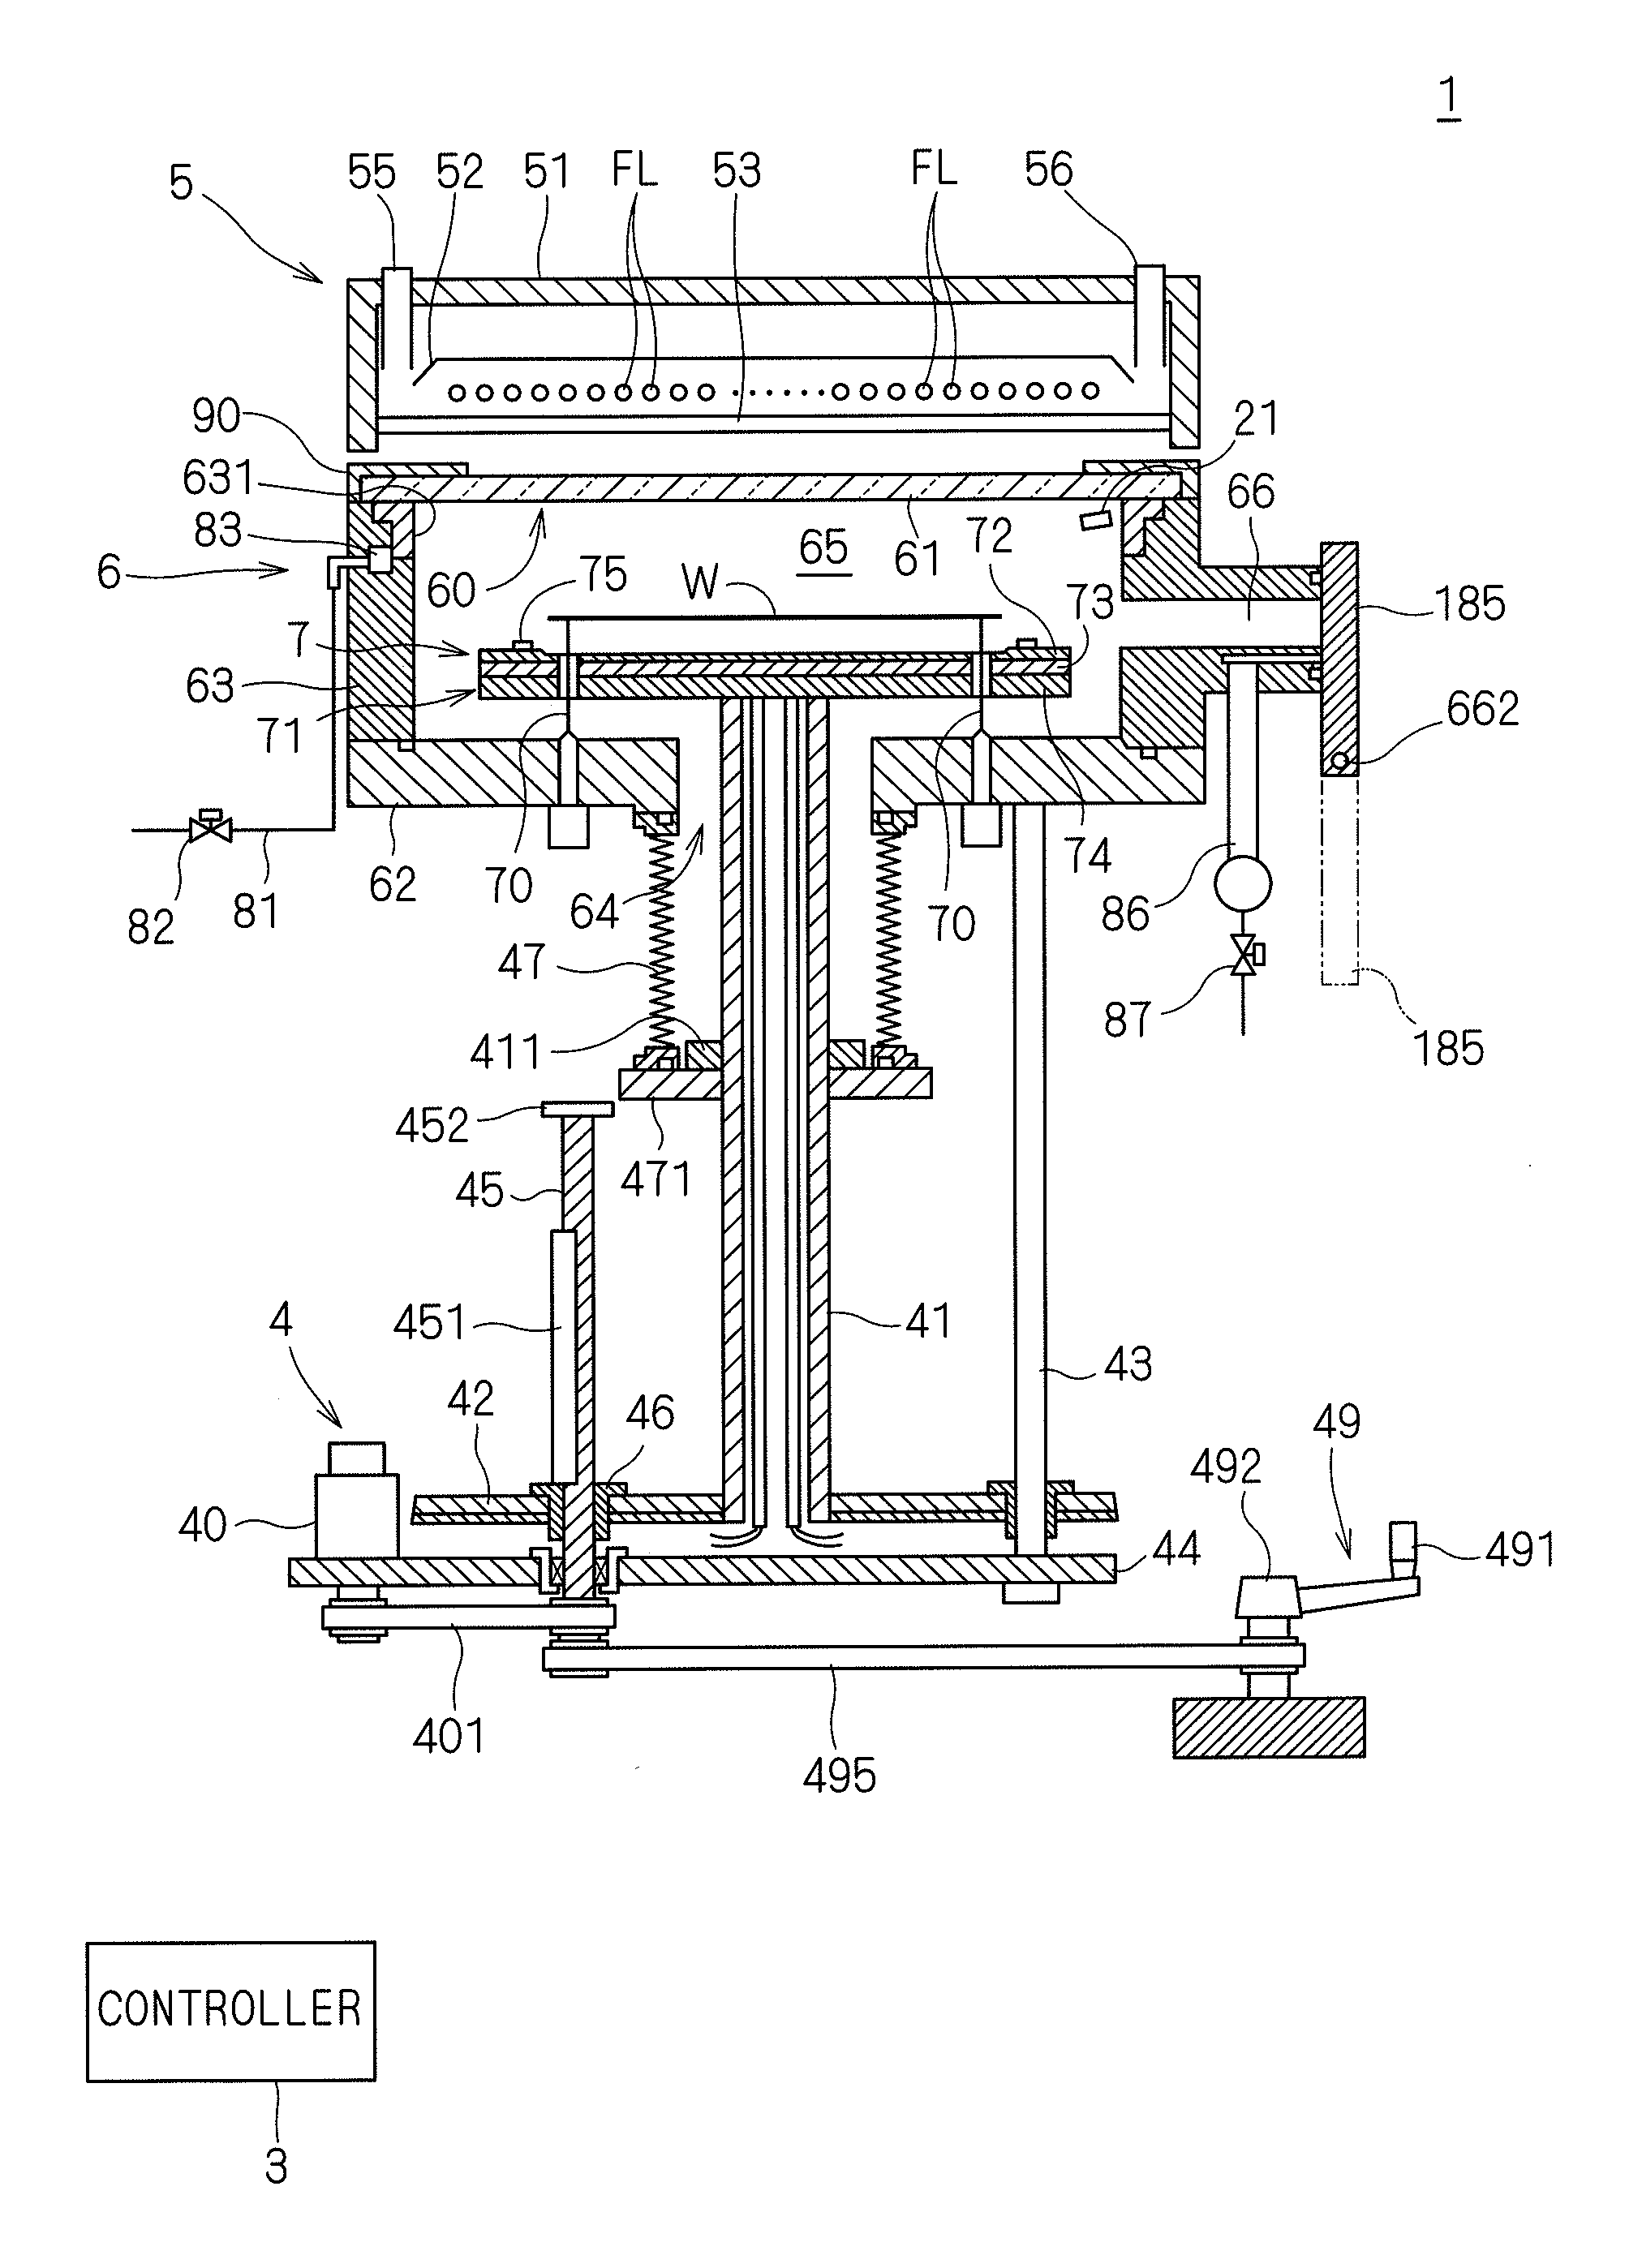 Heat treatment apparatus and heat treatment method for heating substrate by irradiating substrate with flashes of light